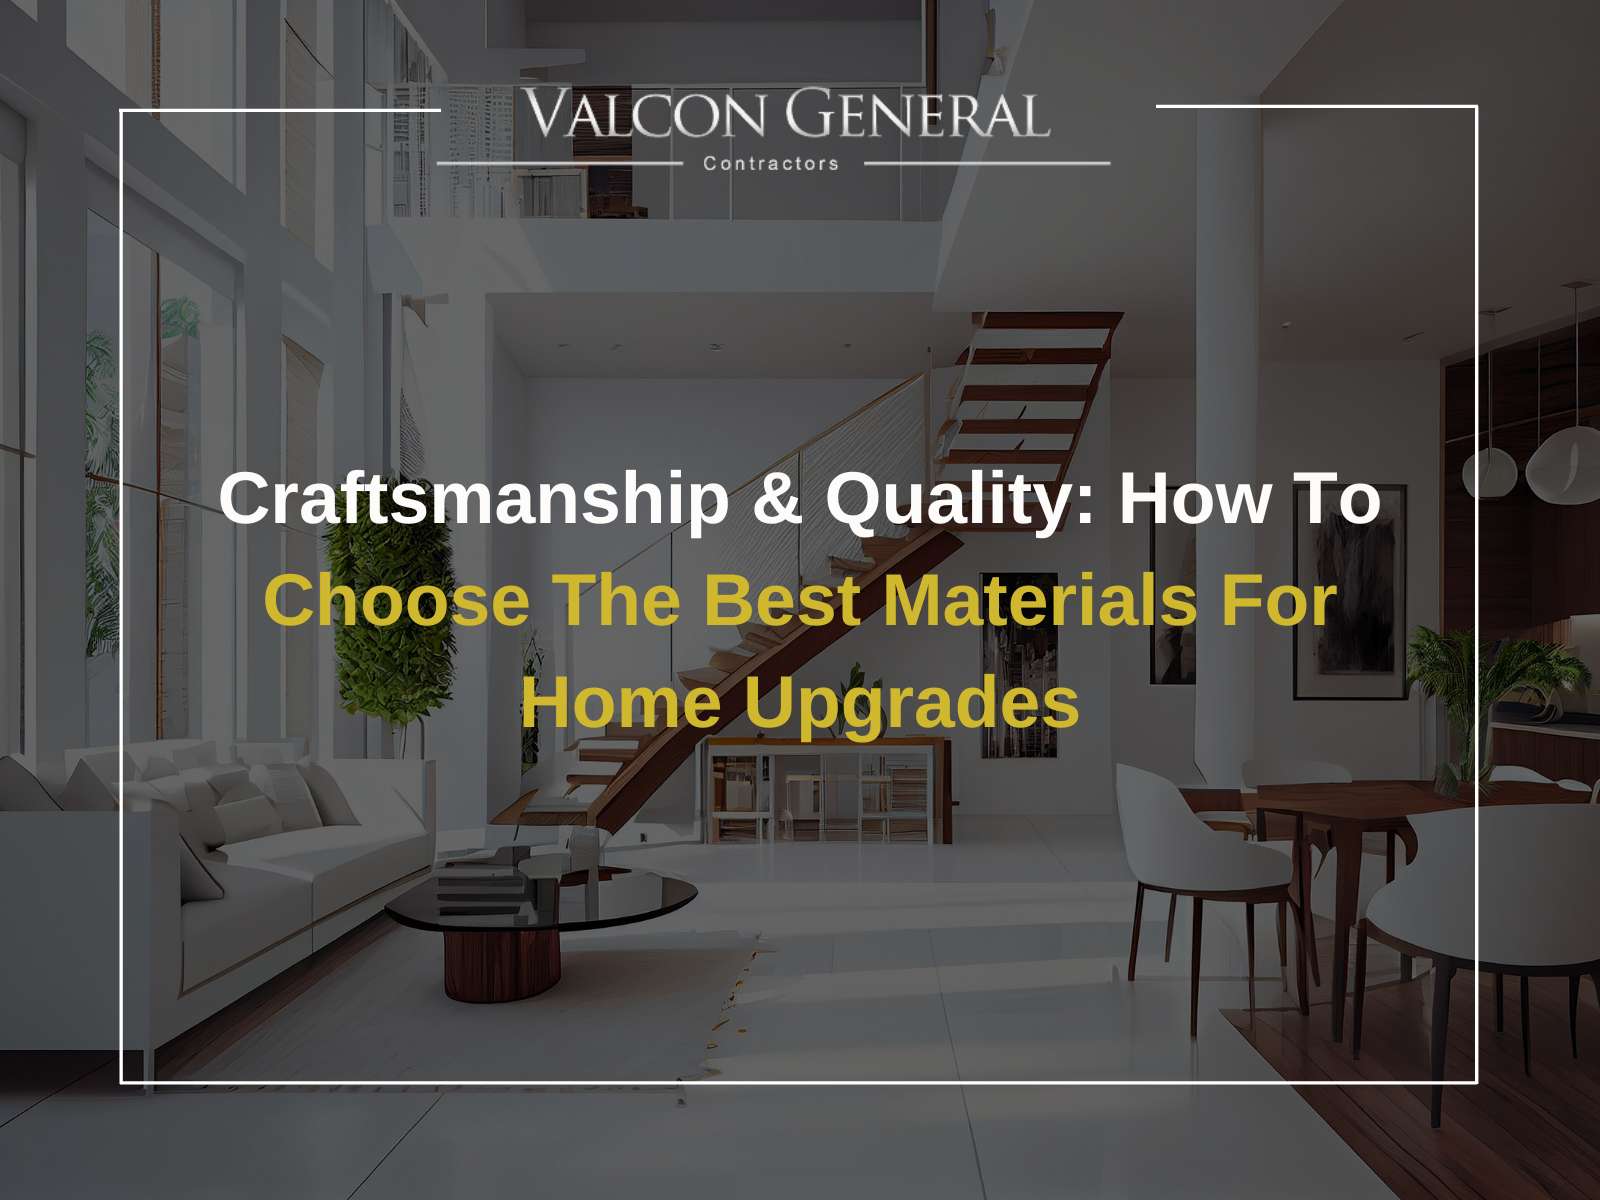 Craftsmanship & Quality How To Choose The Best Materials for Home Upgrades